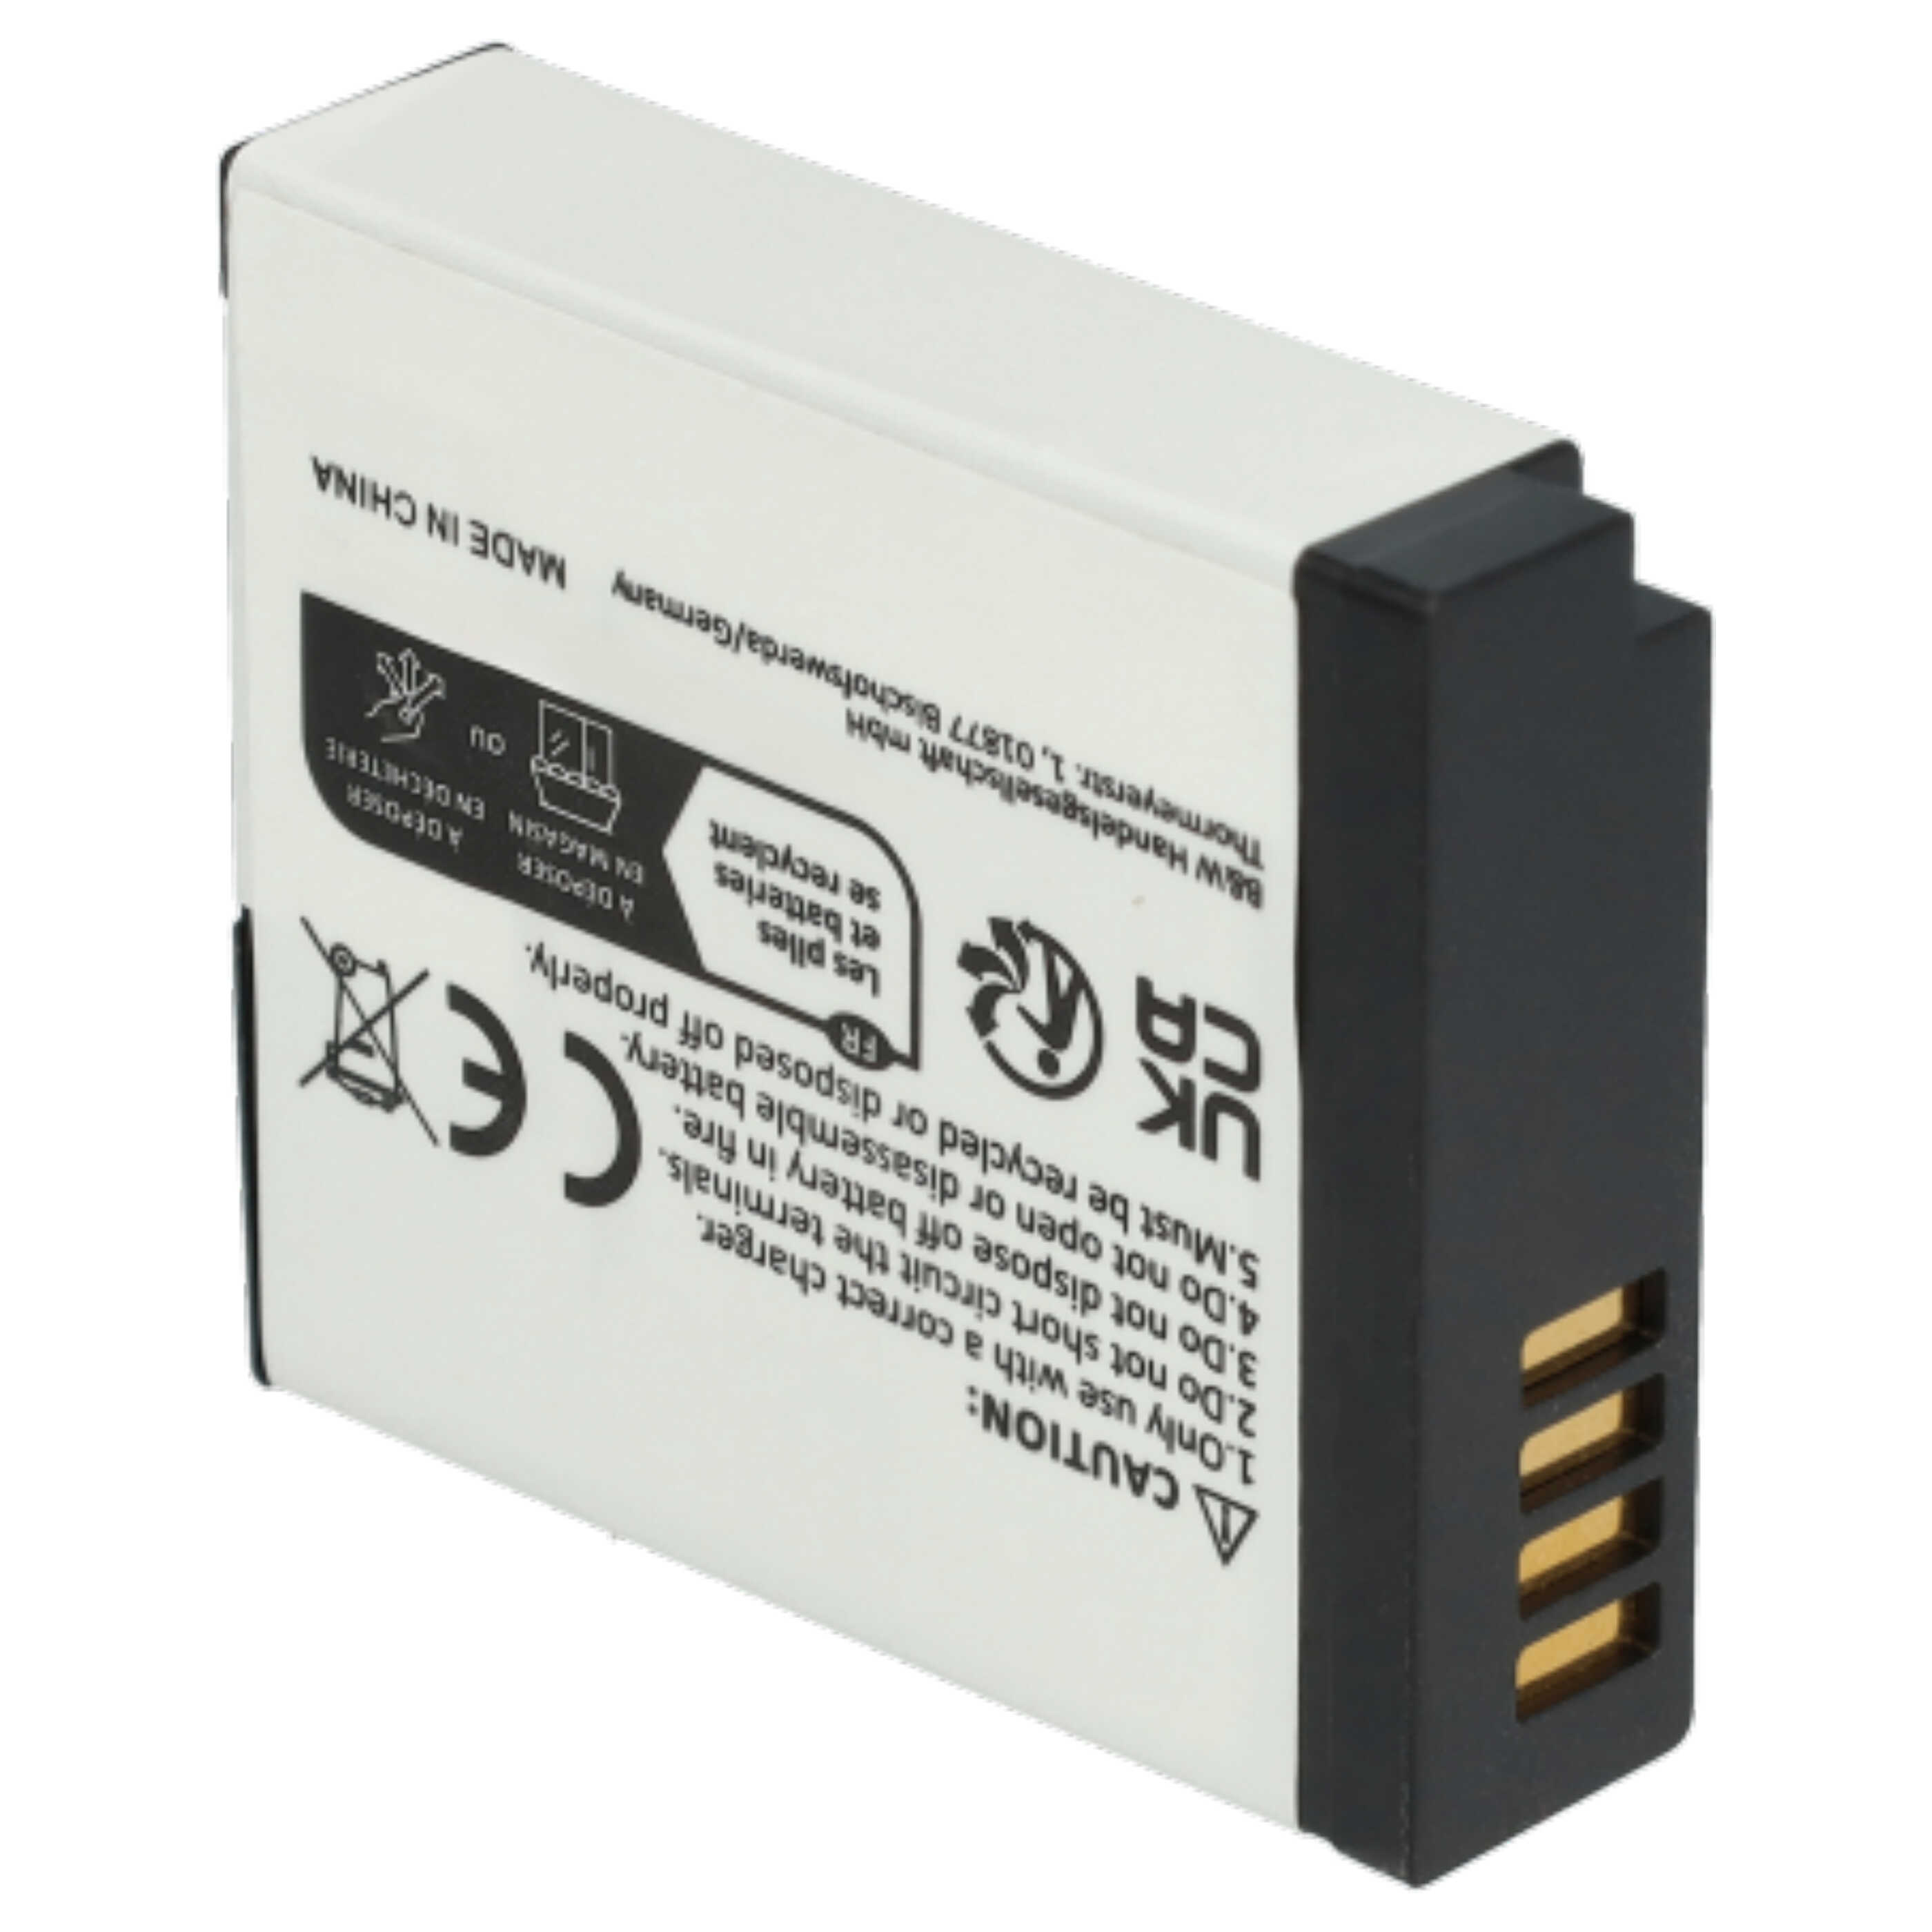 Battery (2 Units) Replacement for Panasonic DMW-BLH7E, DMW-BLH7 - 600mAh, 7.2V, Li-Ion with Info Chip